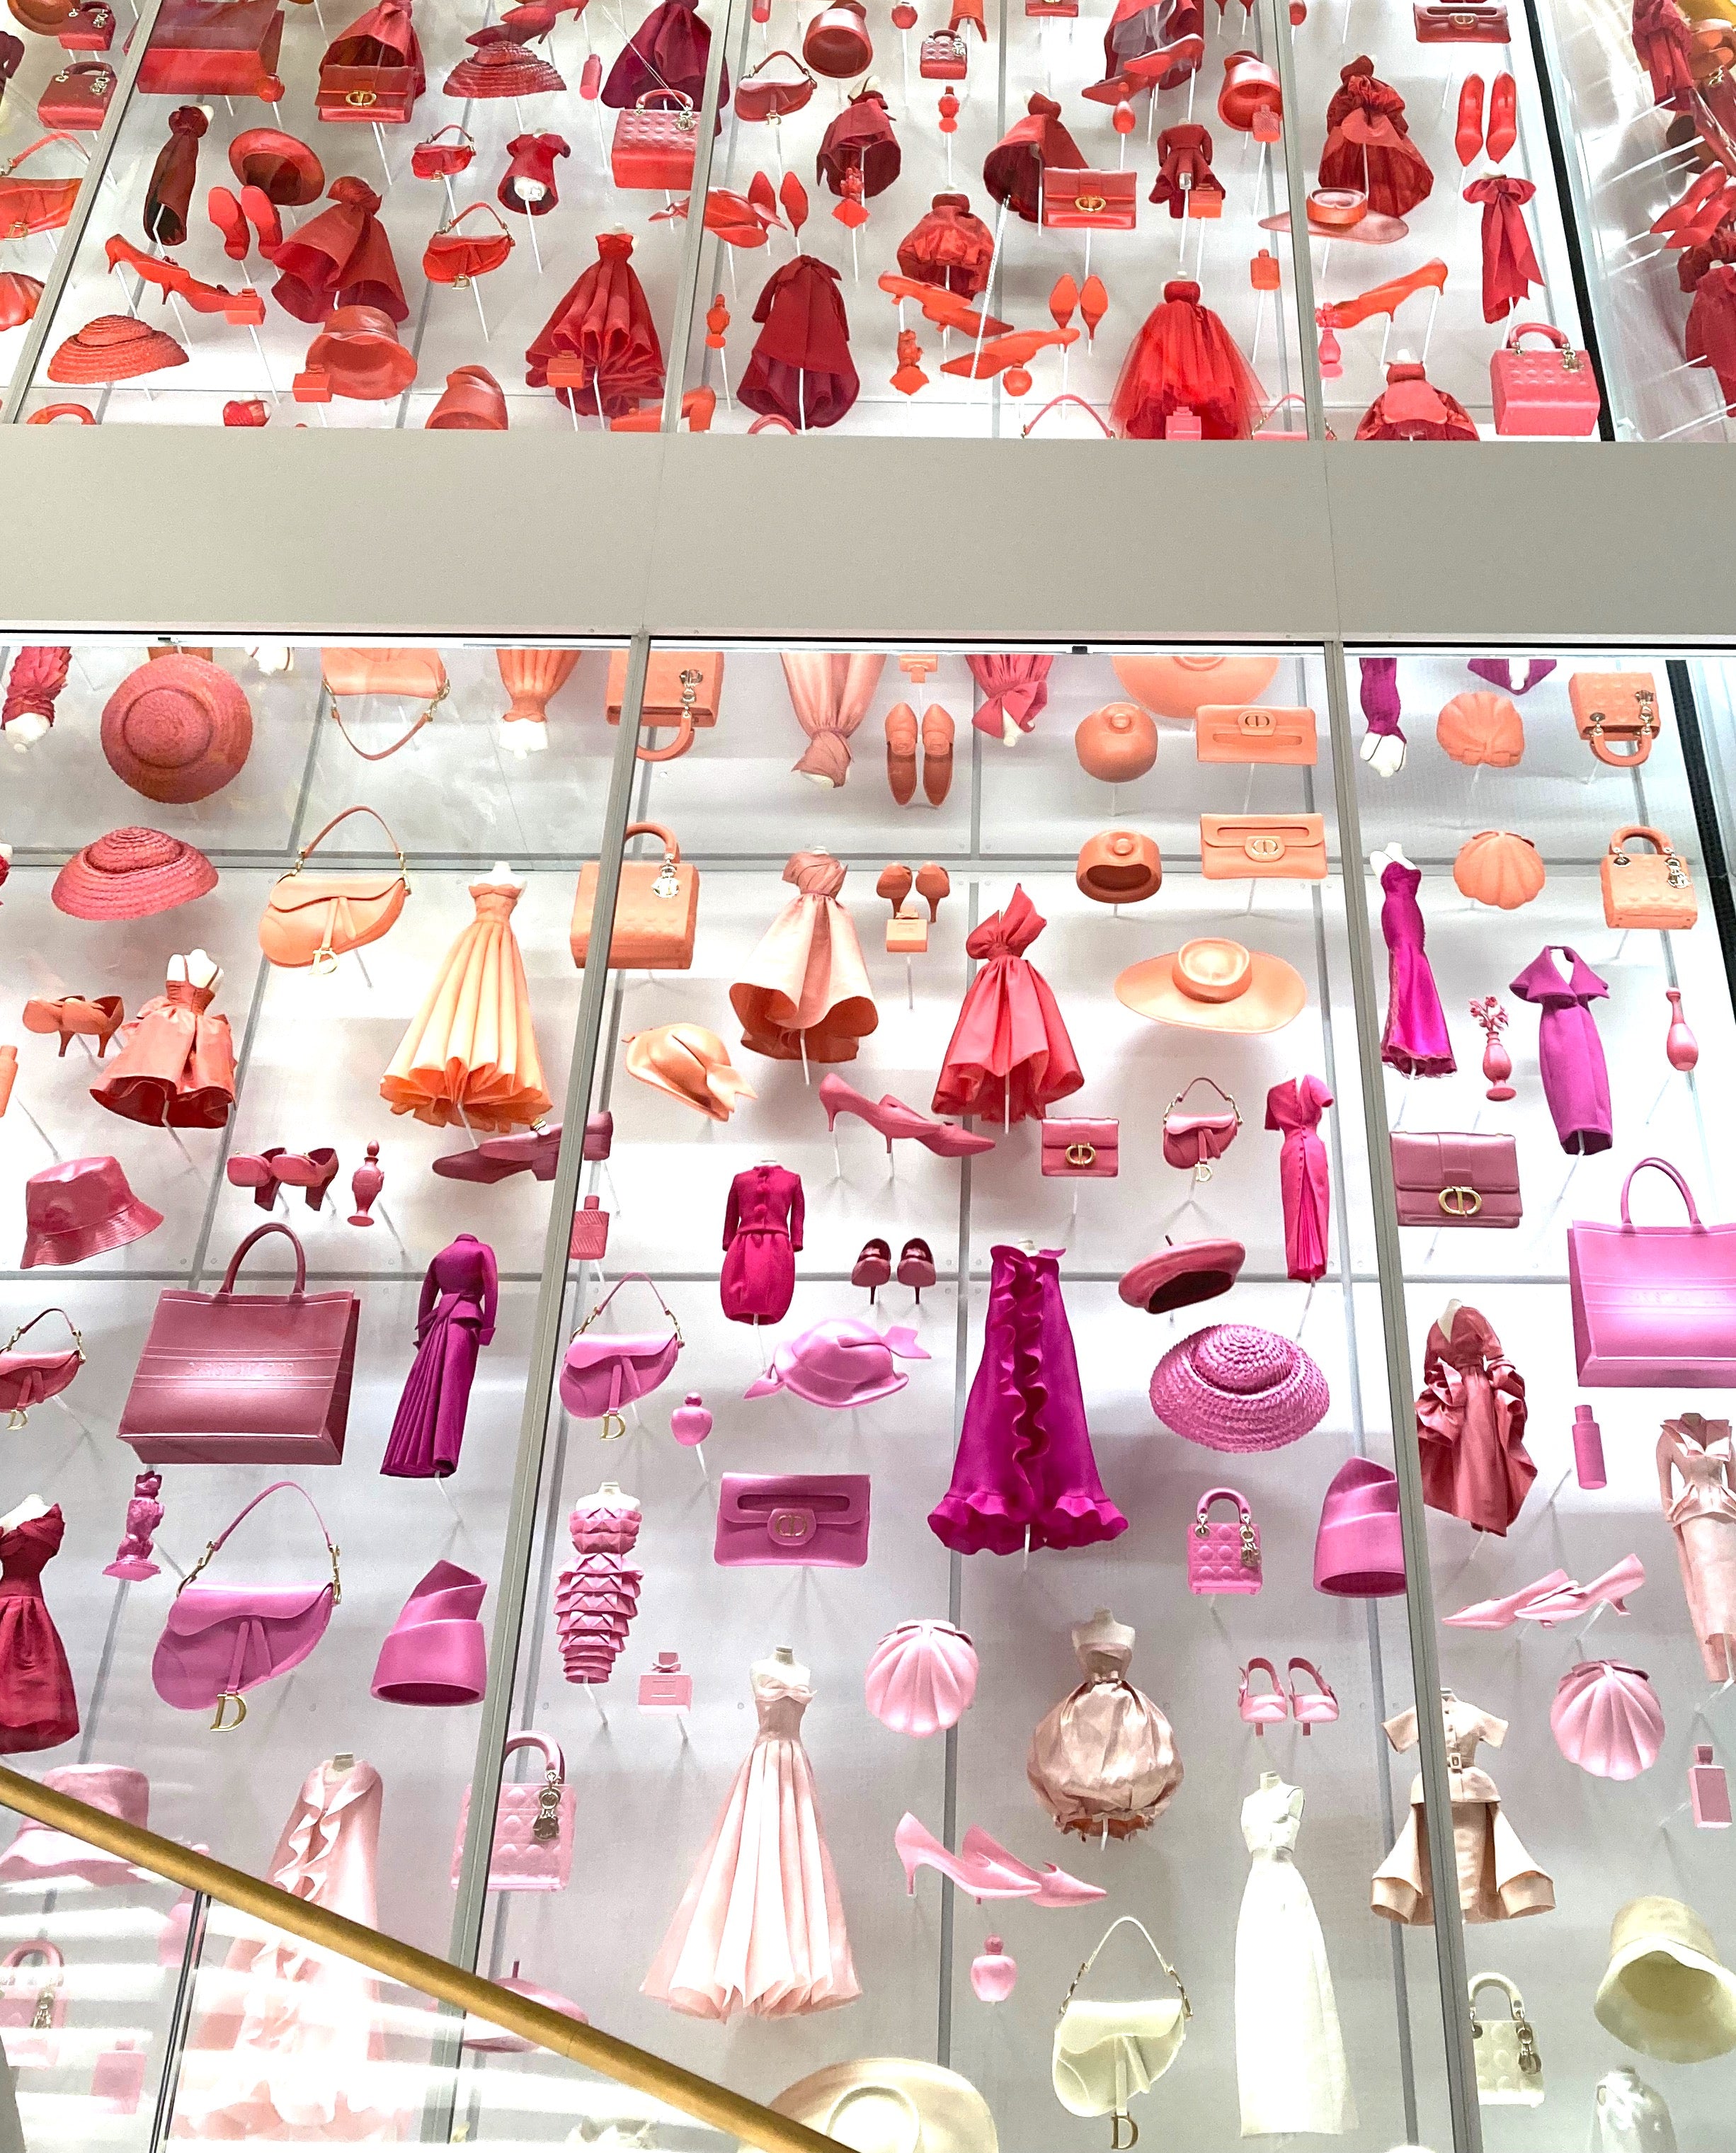 Galerie Dior what to visit in Paris for fashion lovers